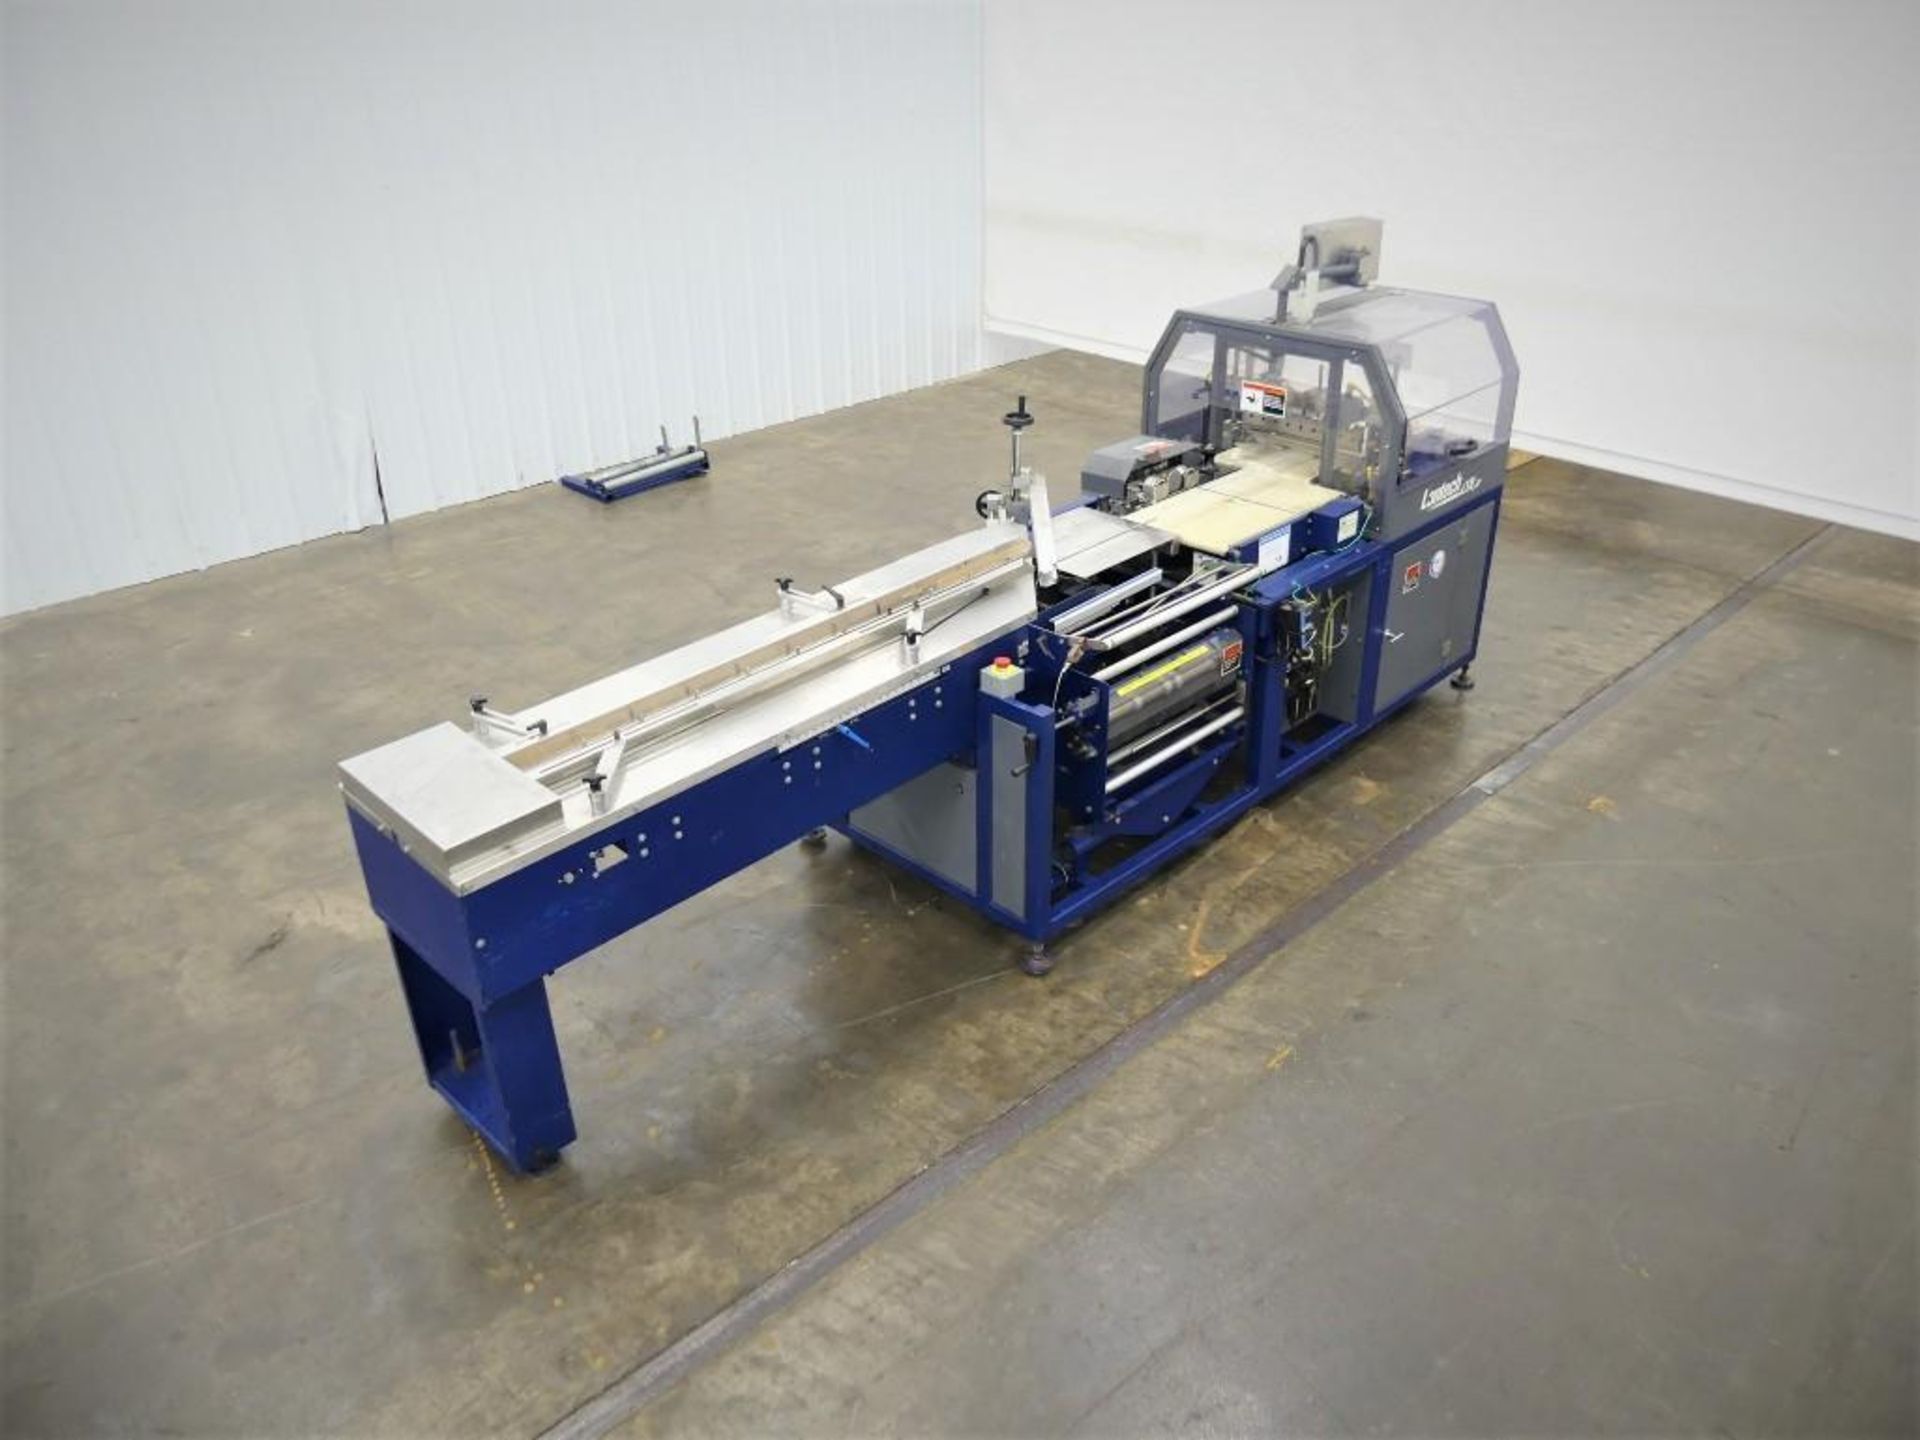 Lantech 200 Side Sealer Includes all parts, electronic components, manuals, etc - Image 3 of 17